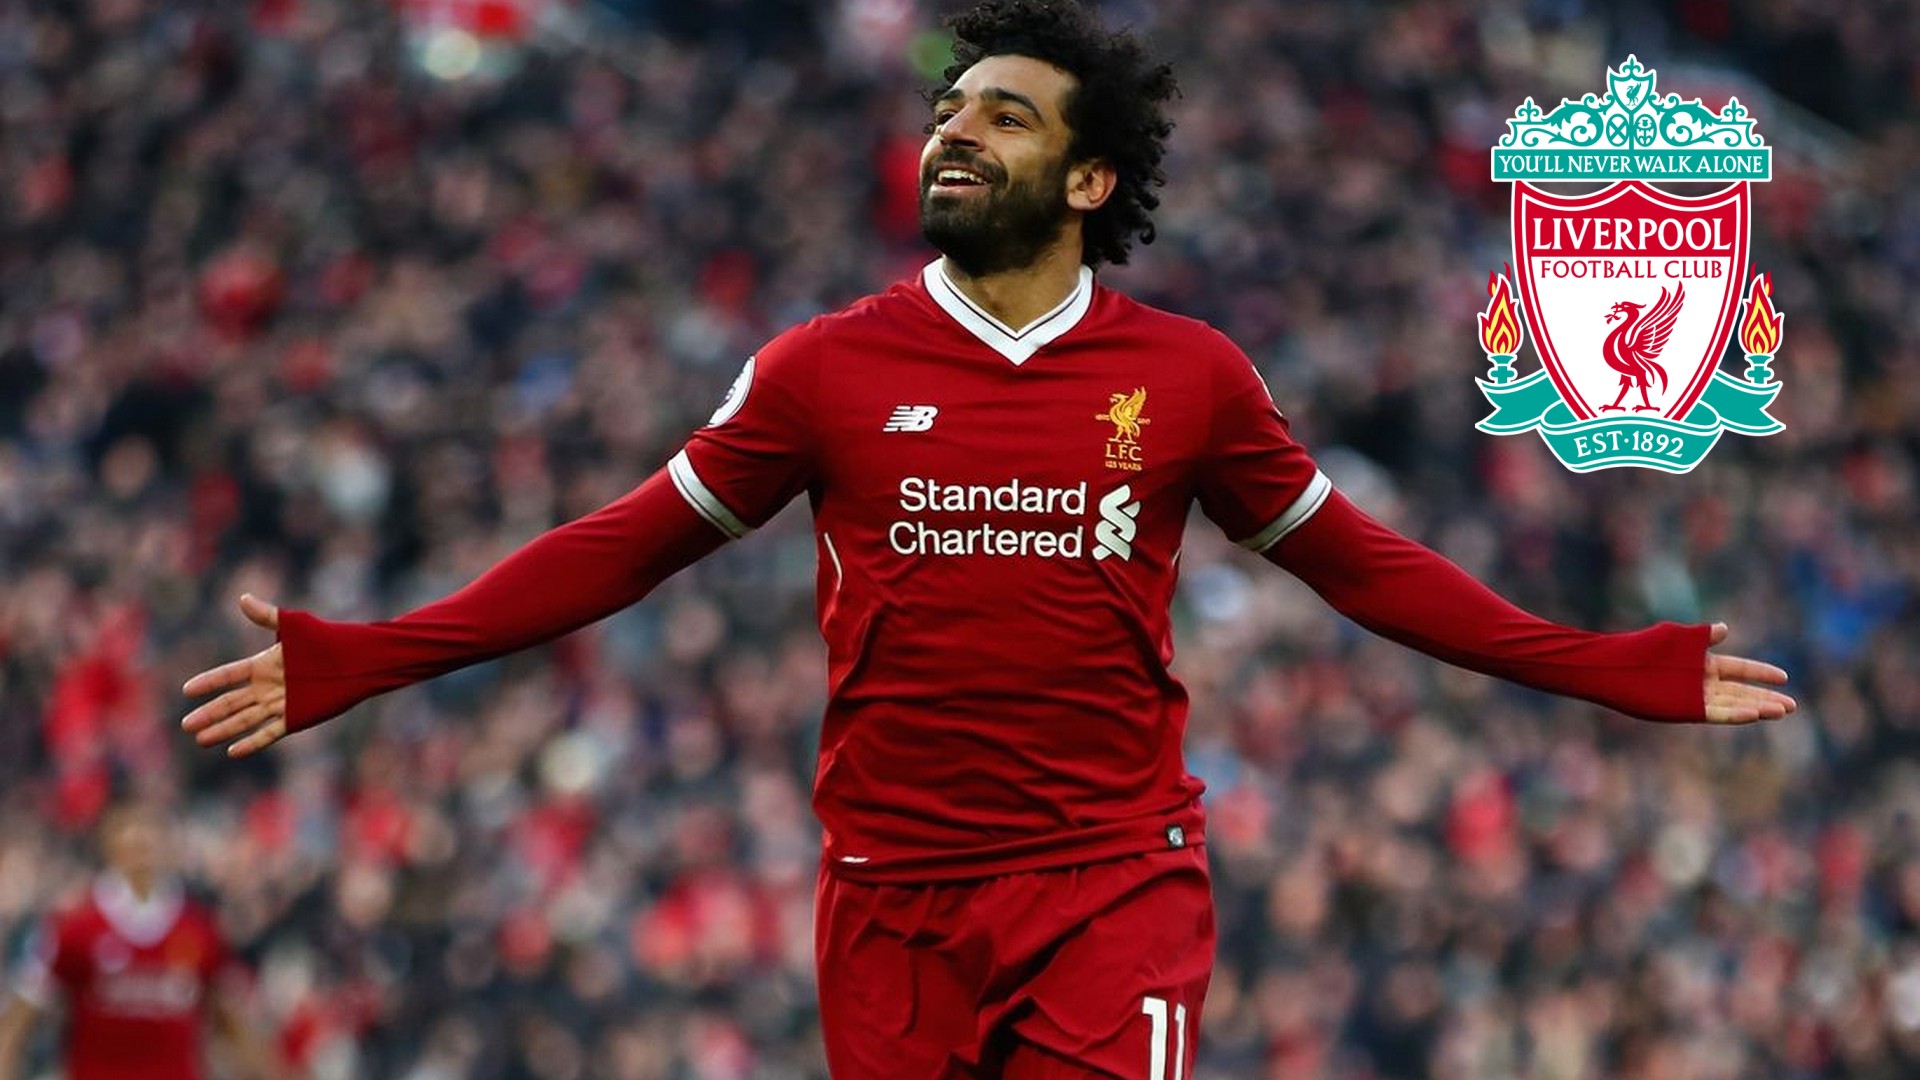 Wallpaper Mohamed Salah Liverpool HD With Resolution 1920X1080 pixel. You can make this wallpaper for your Desktop Computer Backgrounds, Mac Wallpapers, Android Lock screen or iPhone Screensavers